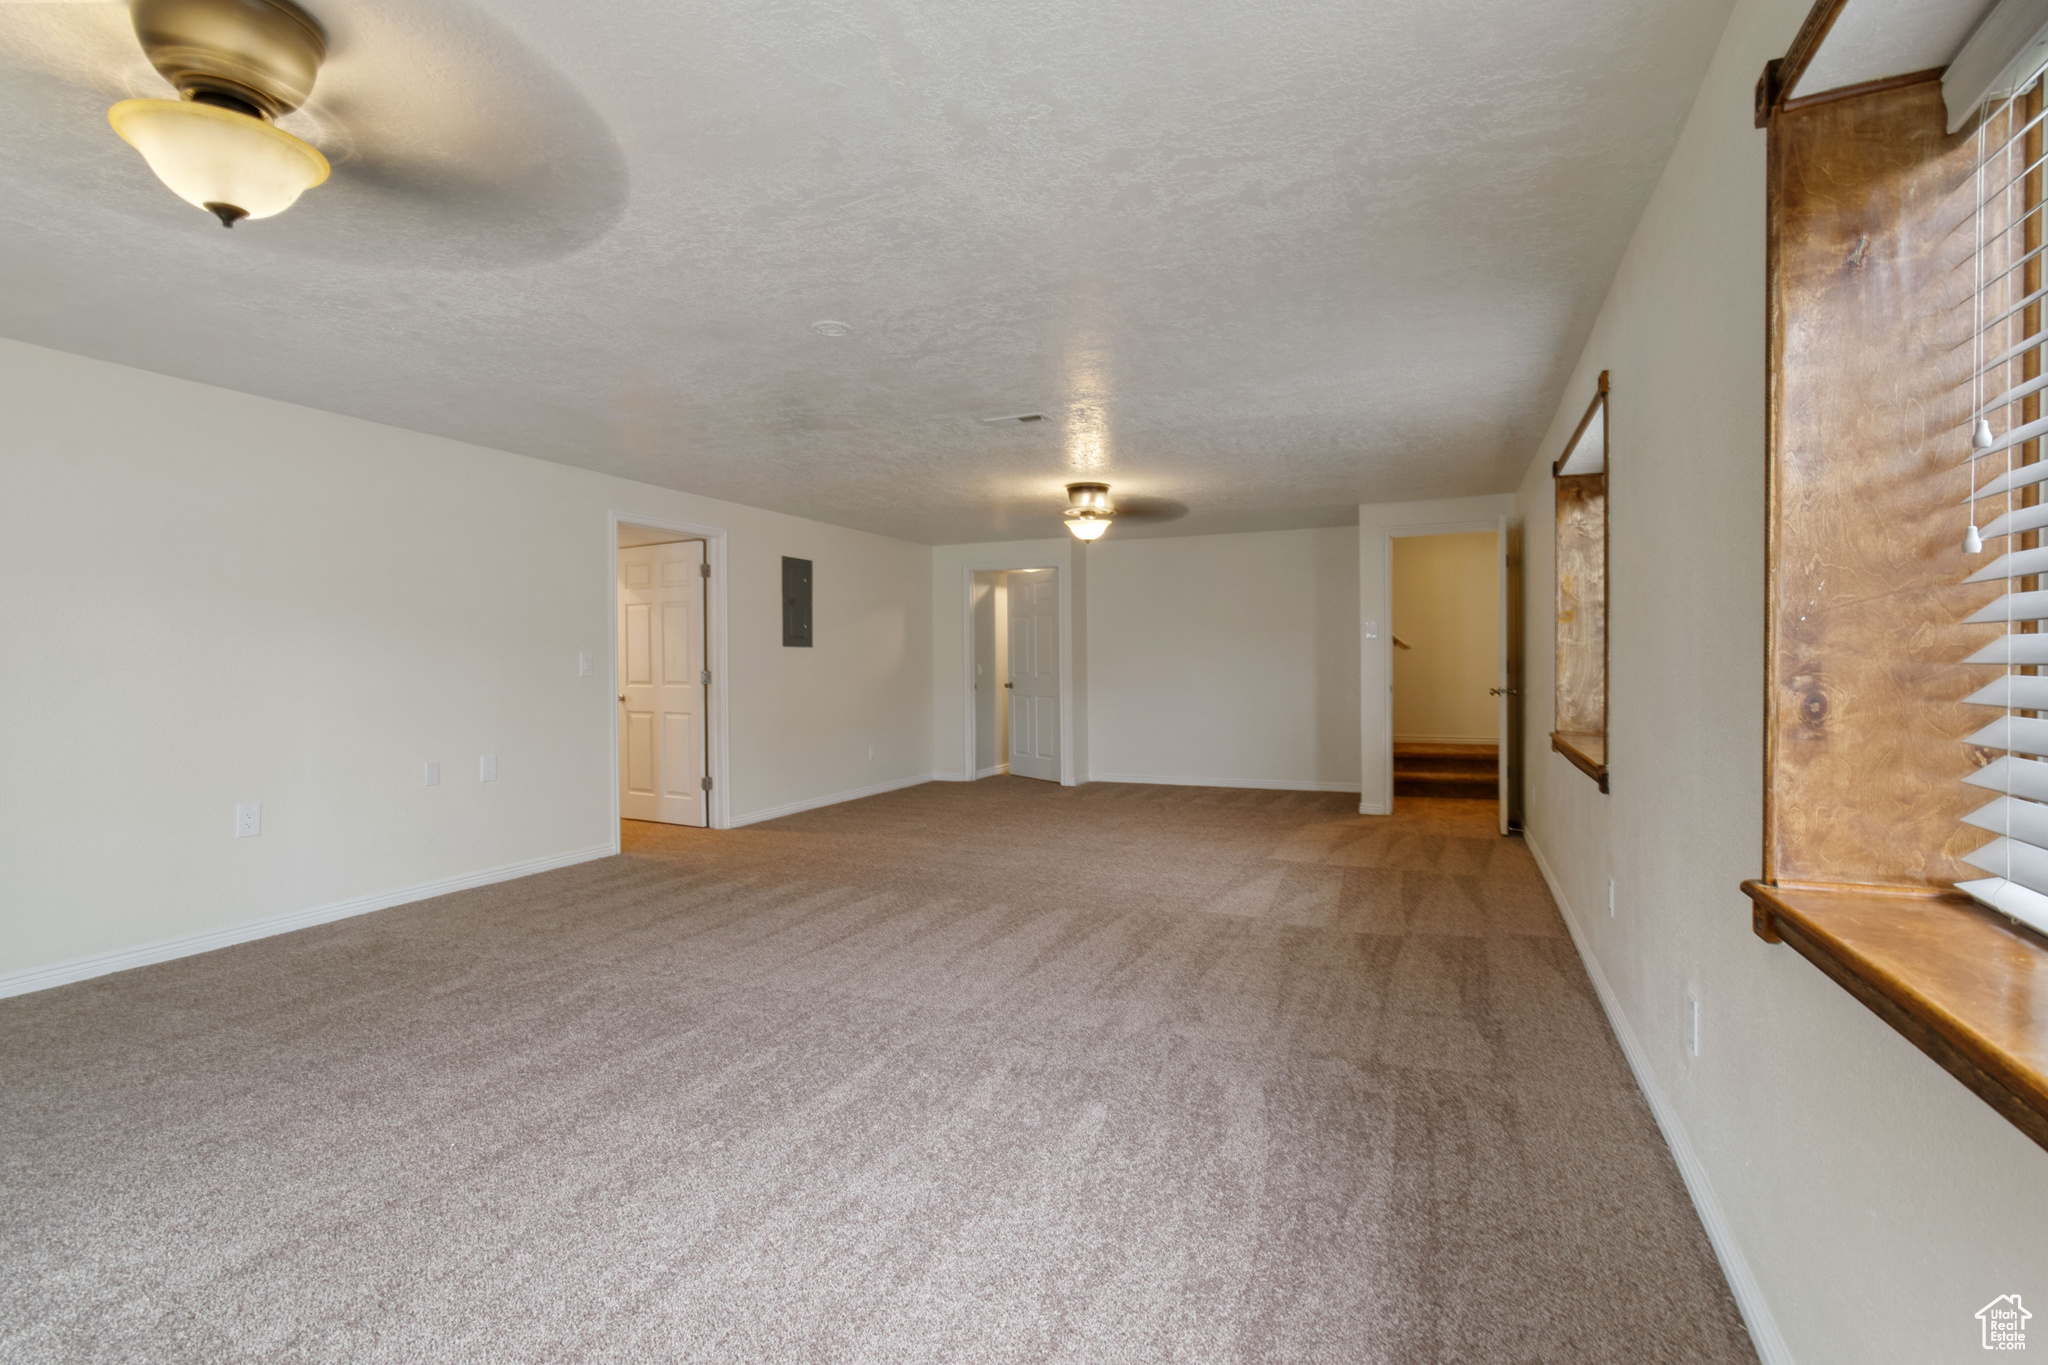 Spare room with carpet, ceiling fan, and a textured ceiling